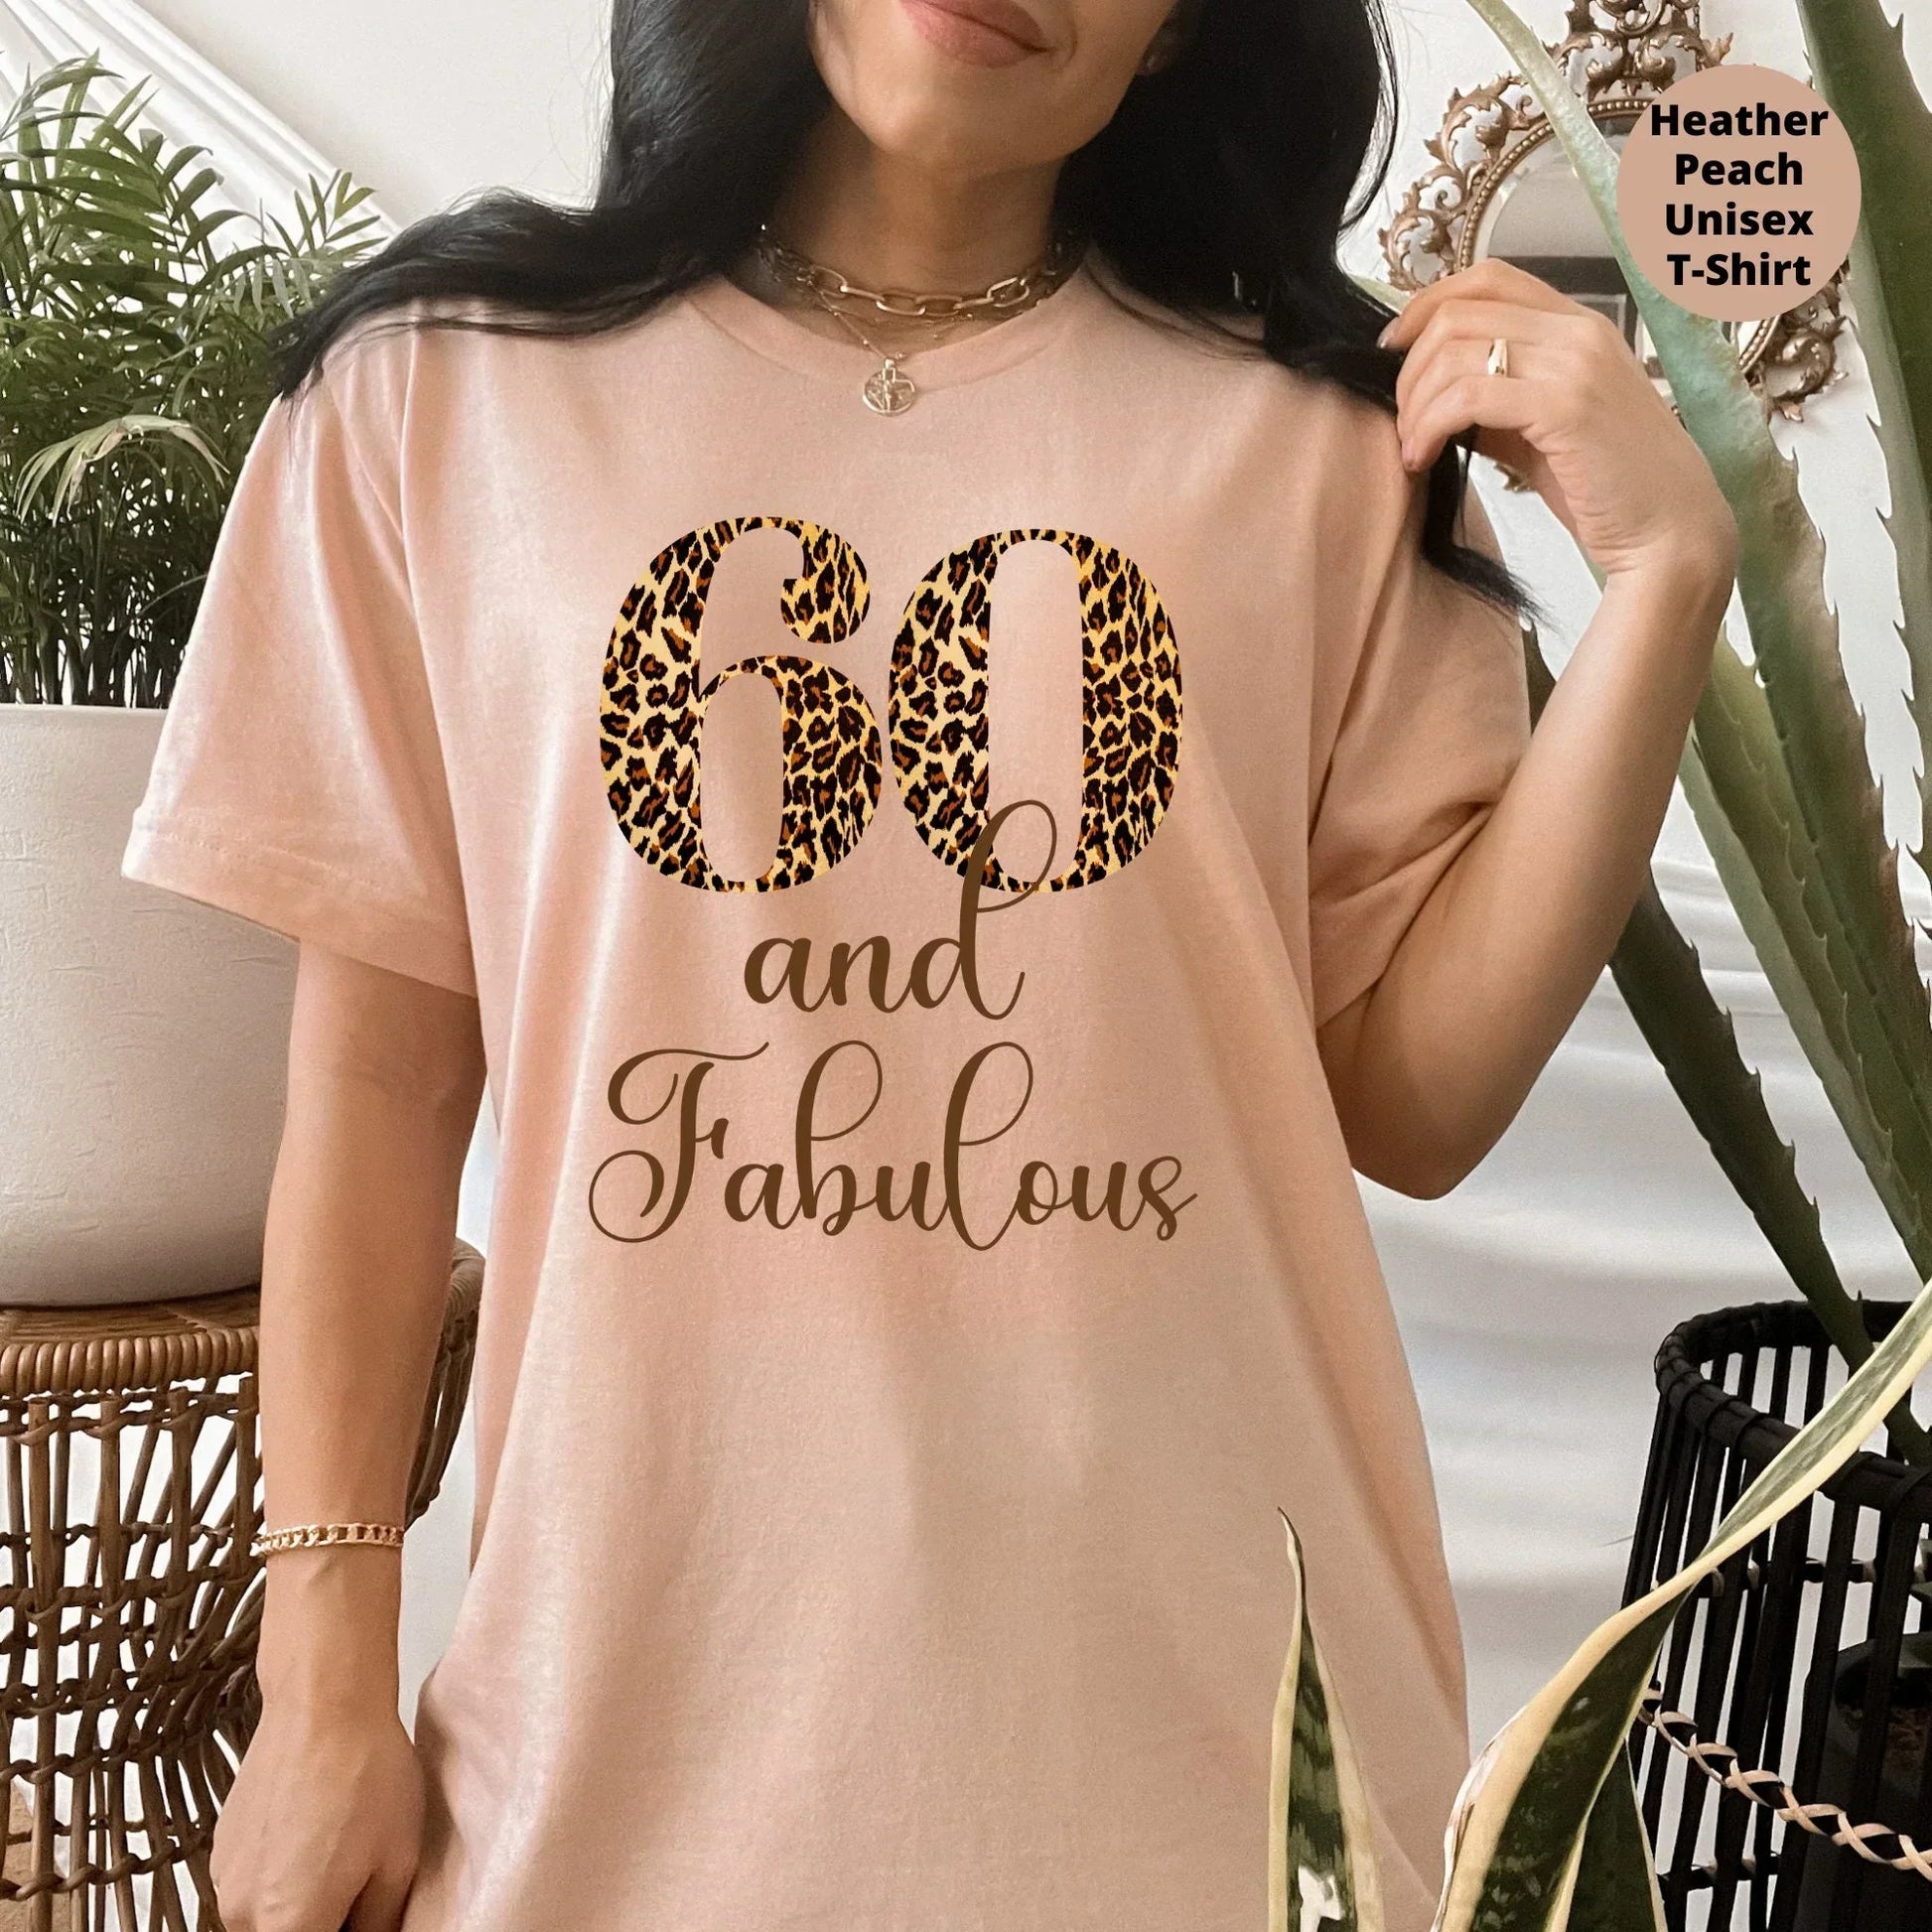 Sixty and Fabulous Birthday Shirt, Embrace Your Wisdom and Celebrate Your 60th Birthday with Style - Get Your Premium Birthday Shirt Today!